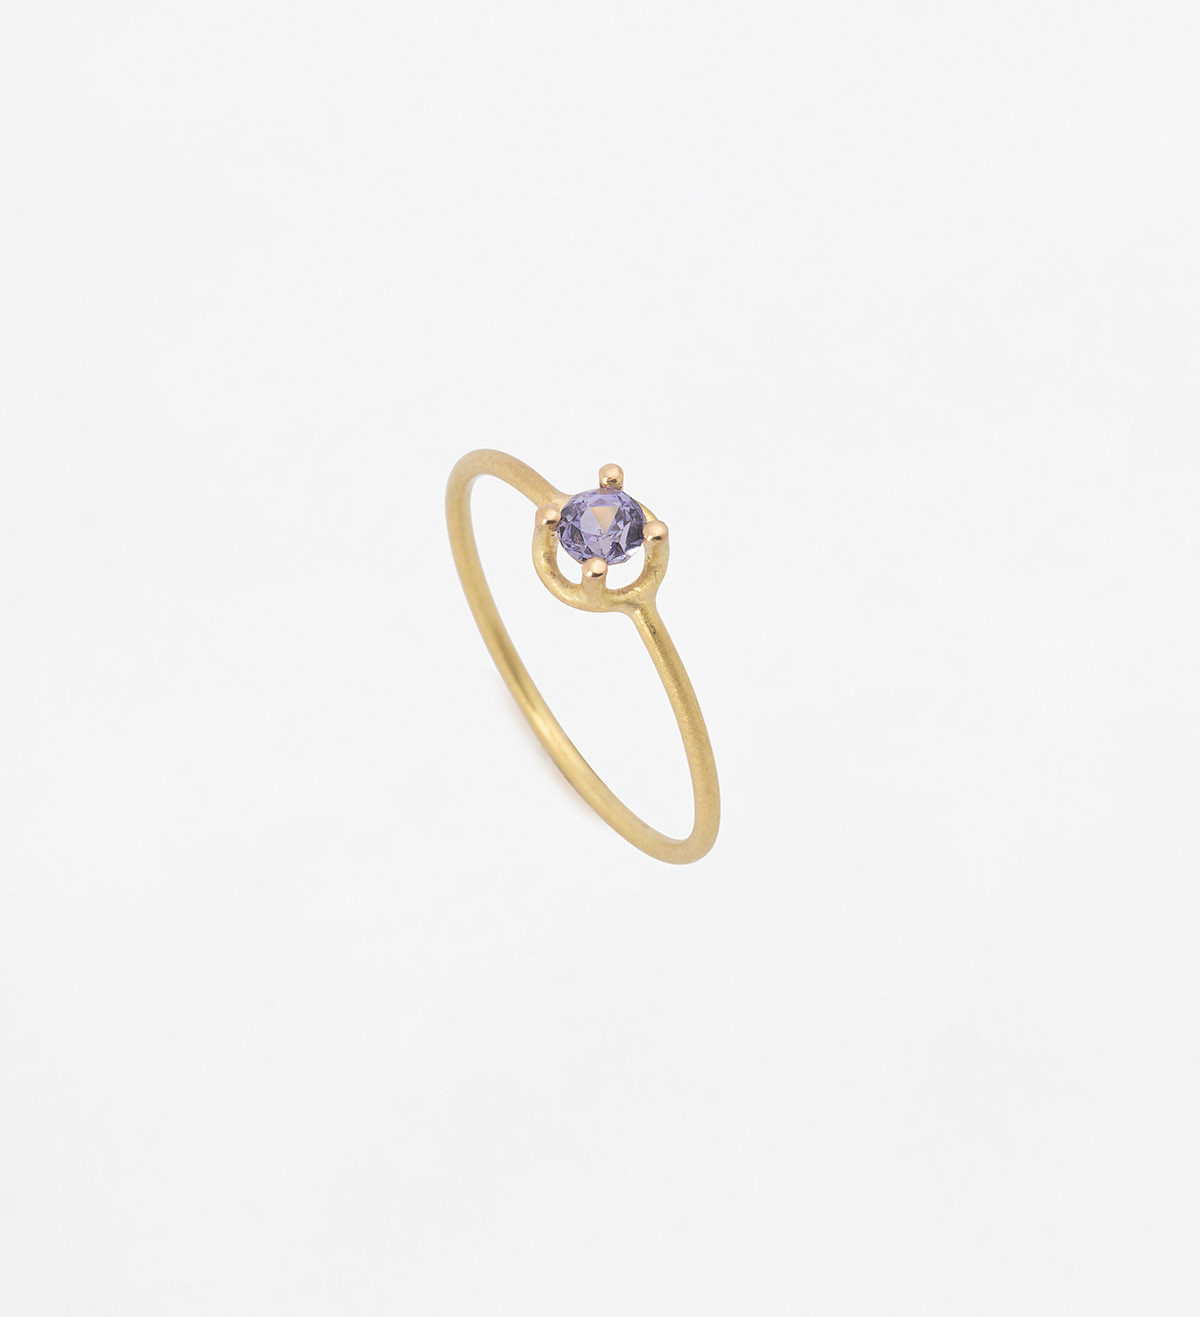 18k gold ring with lila sapphire Wennick-lefèvre 0.21c